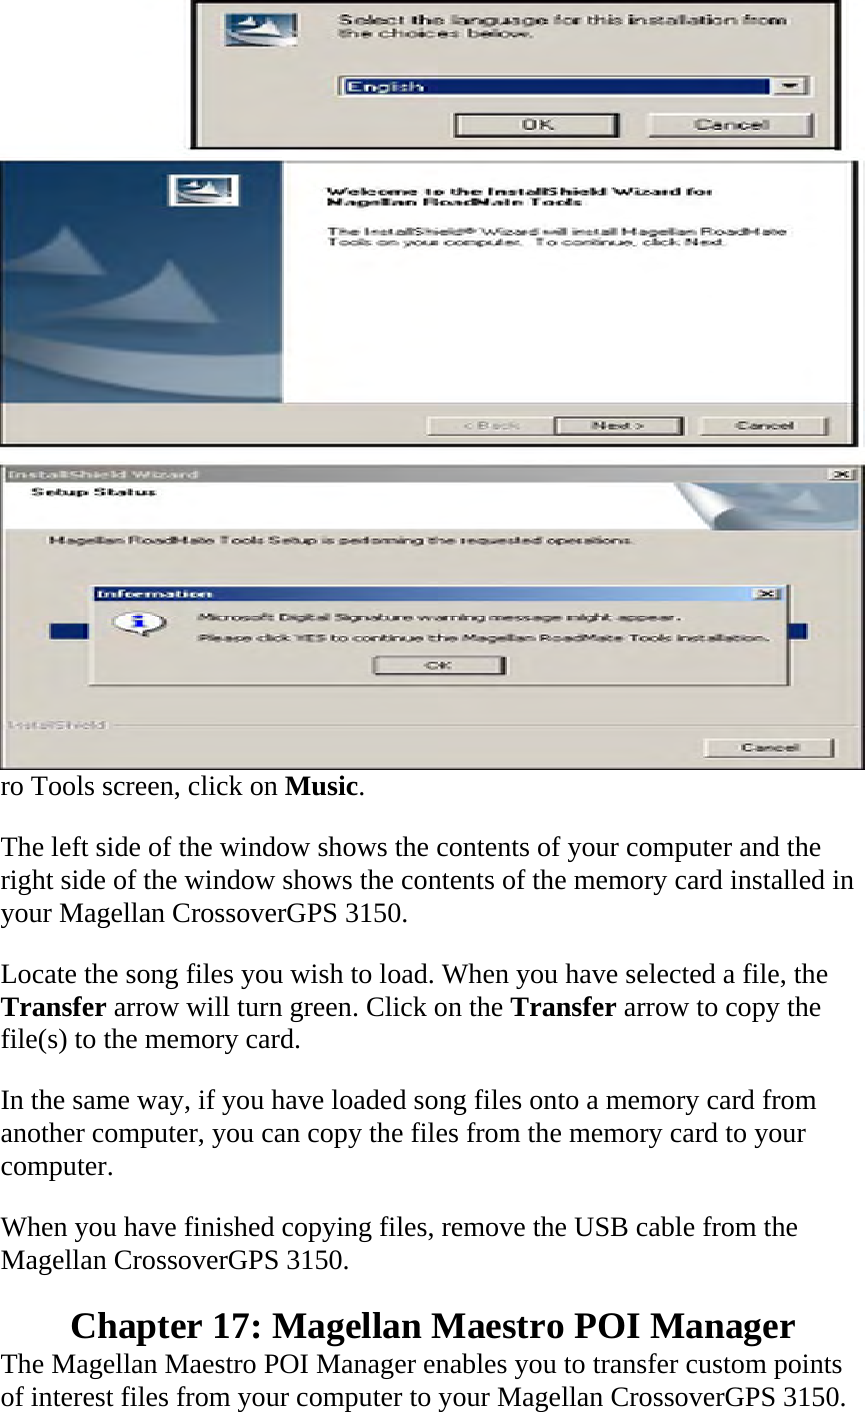  ro Tools screen, click on Music.  The left side of the window shows the contents of your computer and the right side of the window shows the contents of the memory card installed in your Magellan CrossoverGPS 3150.  Locate the song files you wish to load. When you have selected a file, the Transfer arrow will turn green. Click on the Transfer arrow to copy the file(s) to the memory card.  In the same way, if you have loaded song files onto a memory card from another computer, you can copy the files from the memory card to your computer.  When you have finished copying files, remove the USB cable from the Magellan CrossoverGPS 3150.  Chapter 17: Magellan Maestro POI Manager  The Magellan Maestro POI Manager enables you to transfer custom points of interest files from your computer to your Magellan CrossoverGPS 3150.  